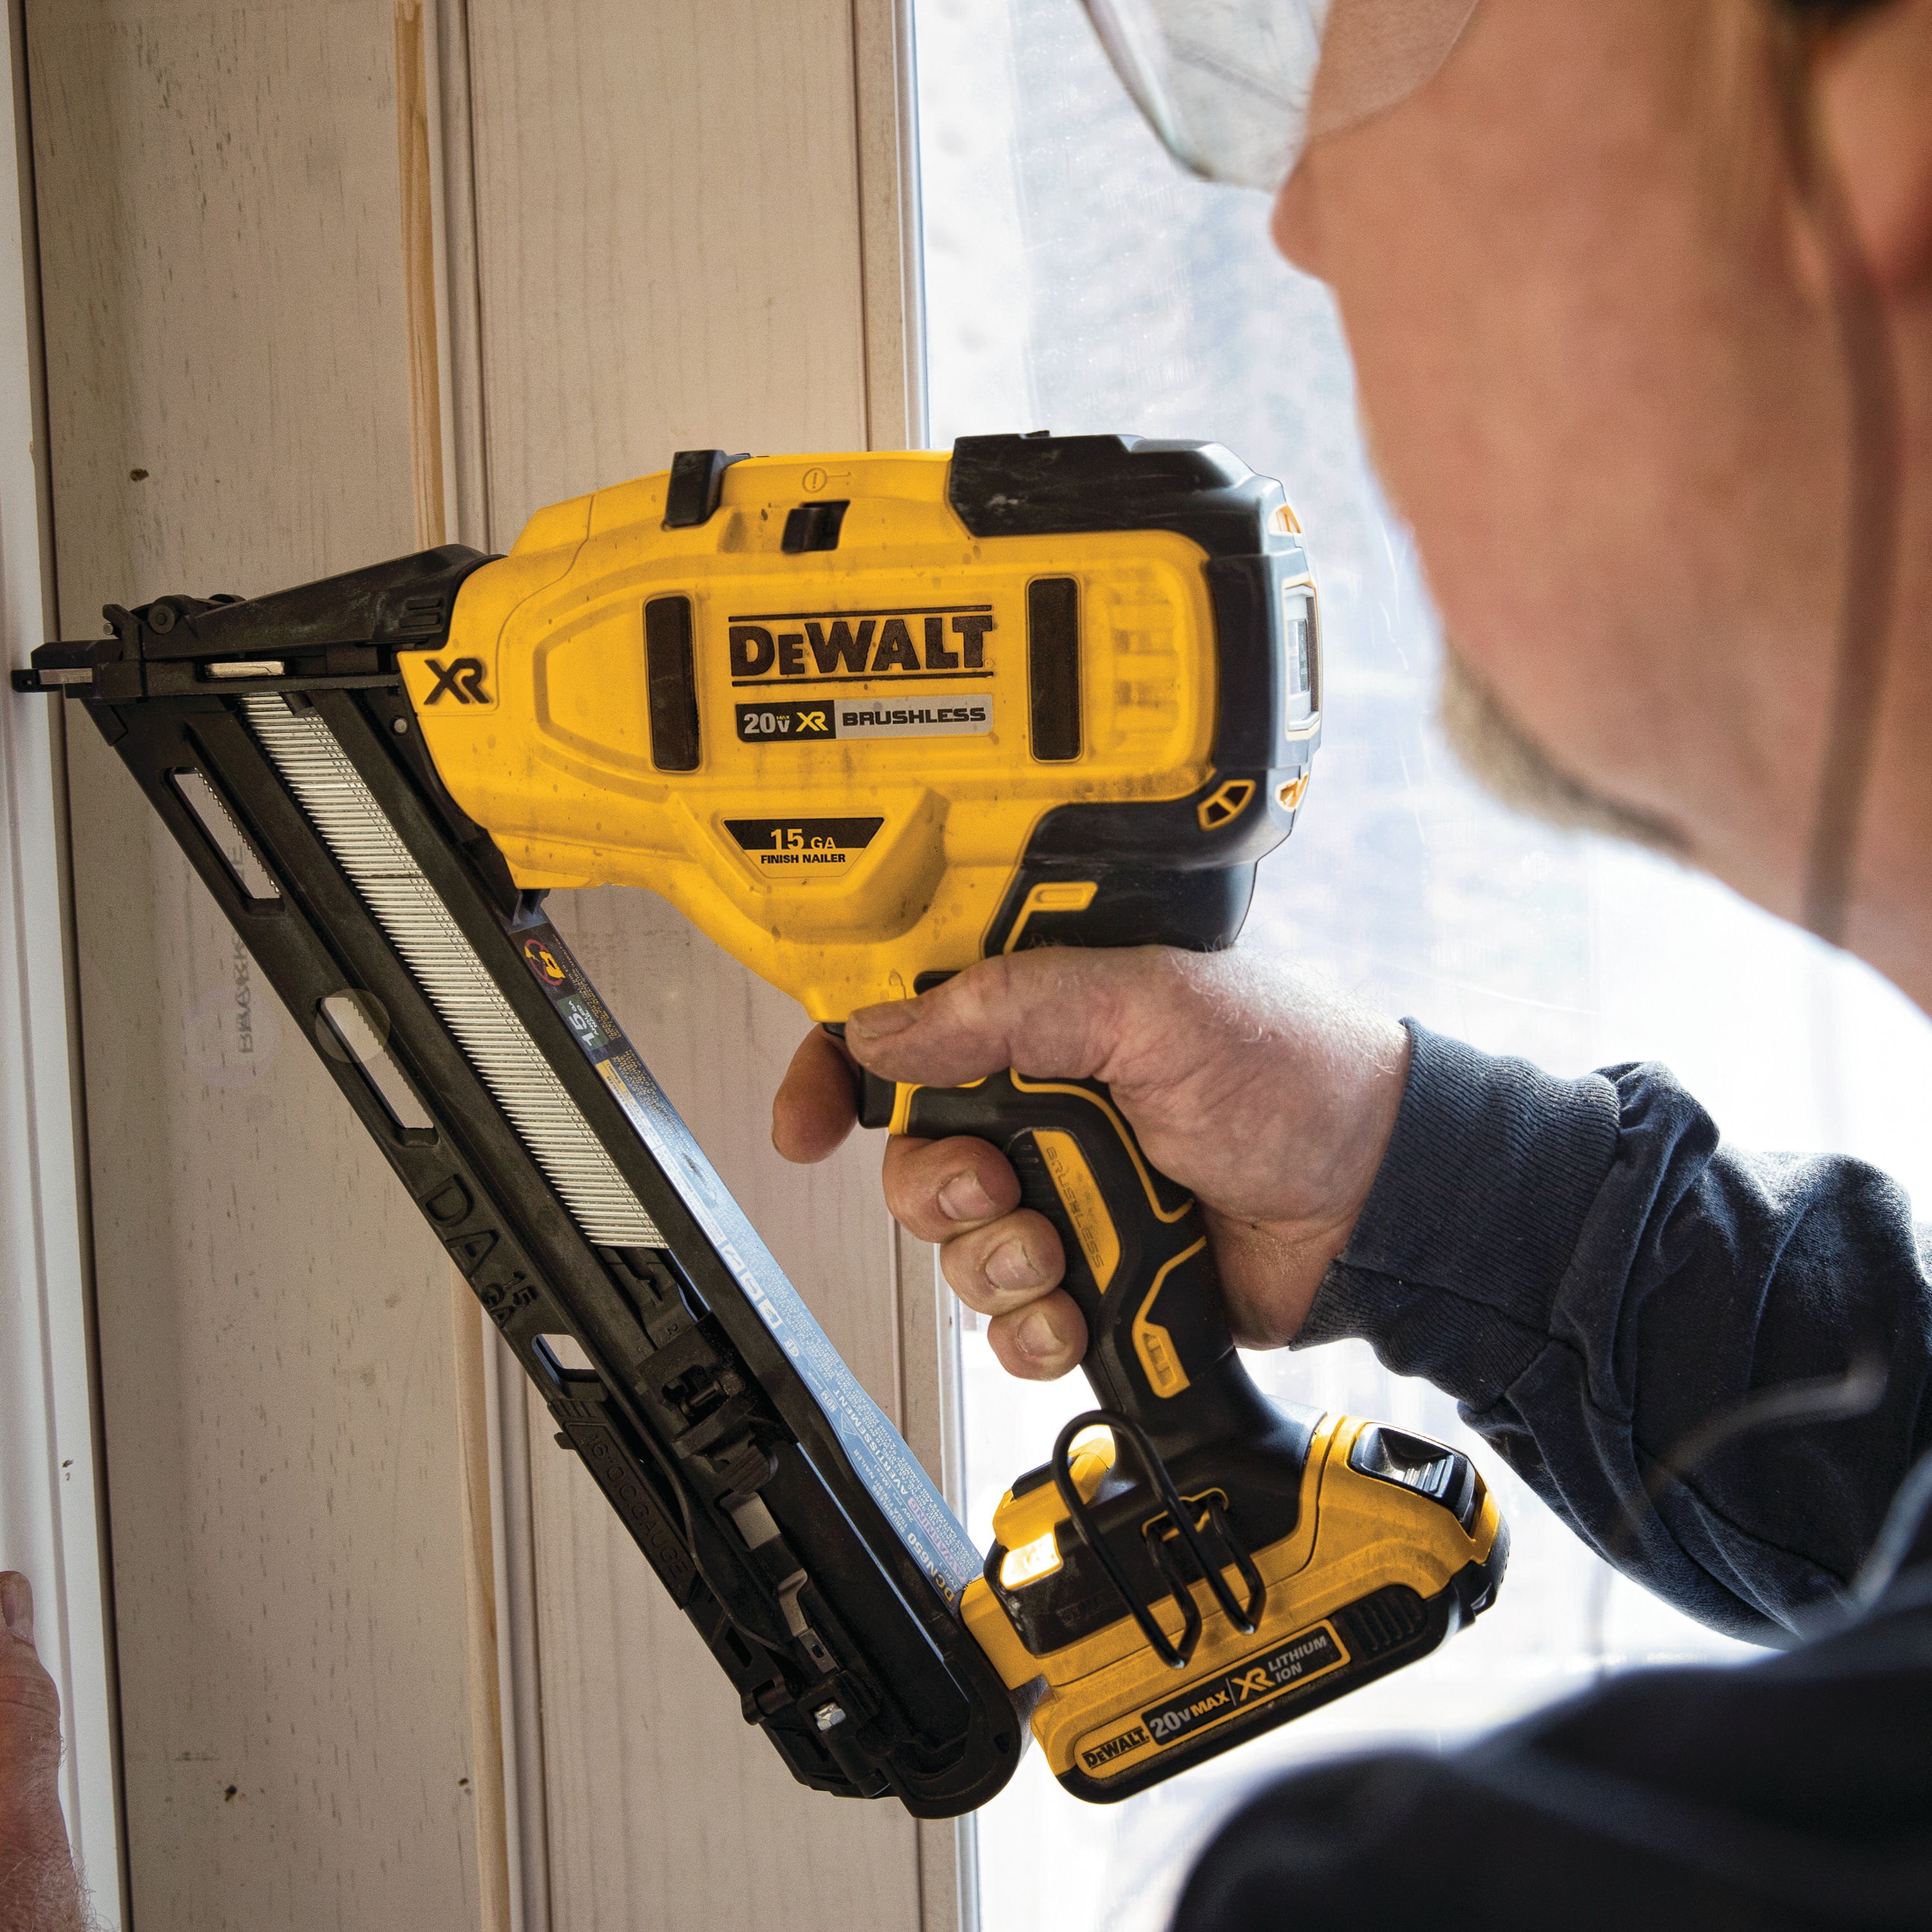 Cordless 15 Gauge Angled Finish Nailer in action on a wooden door frame